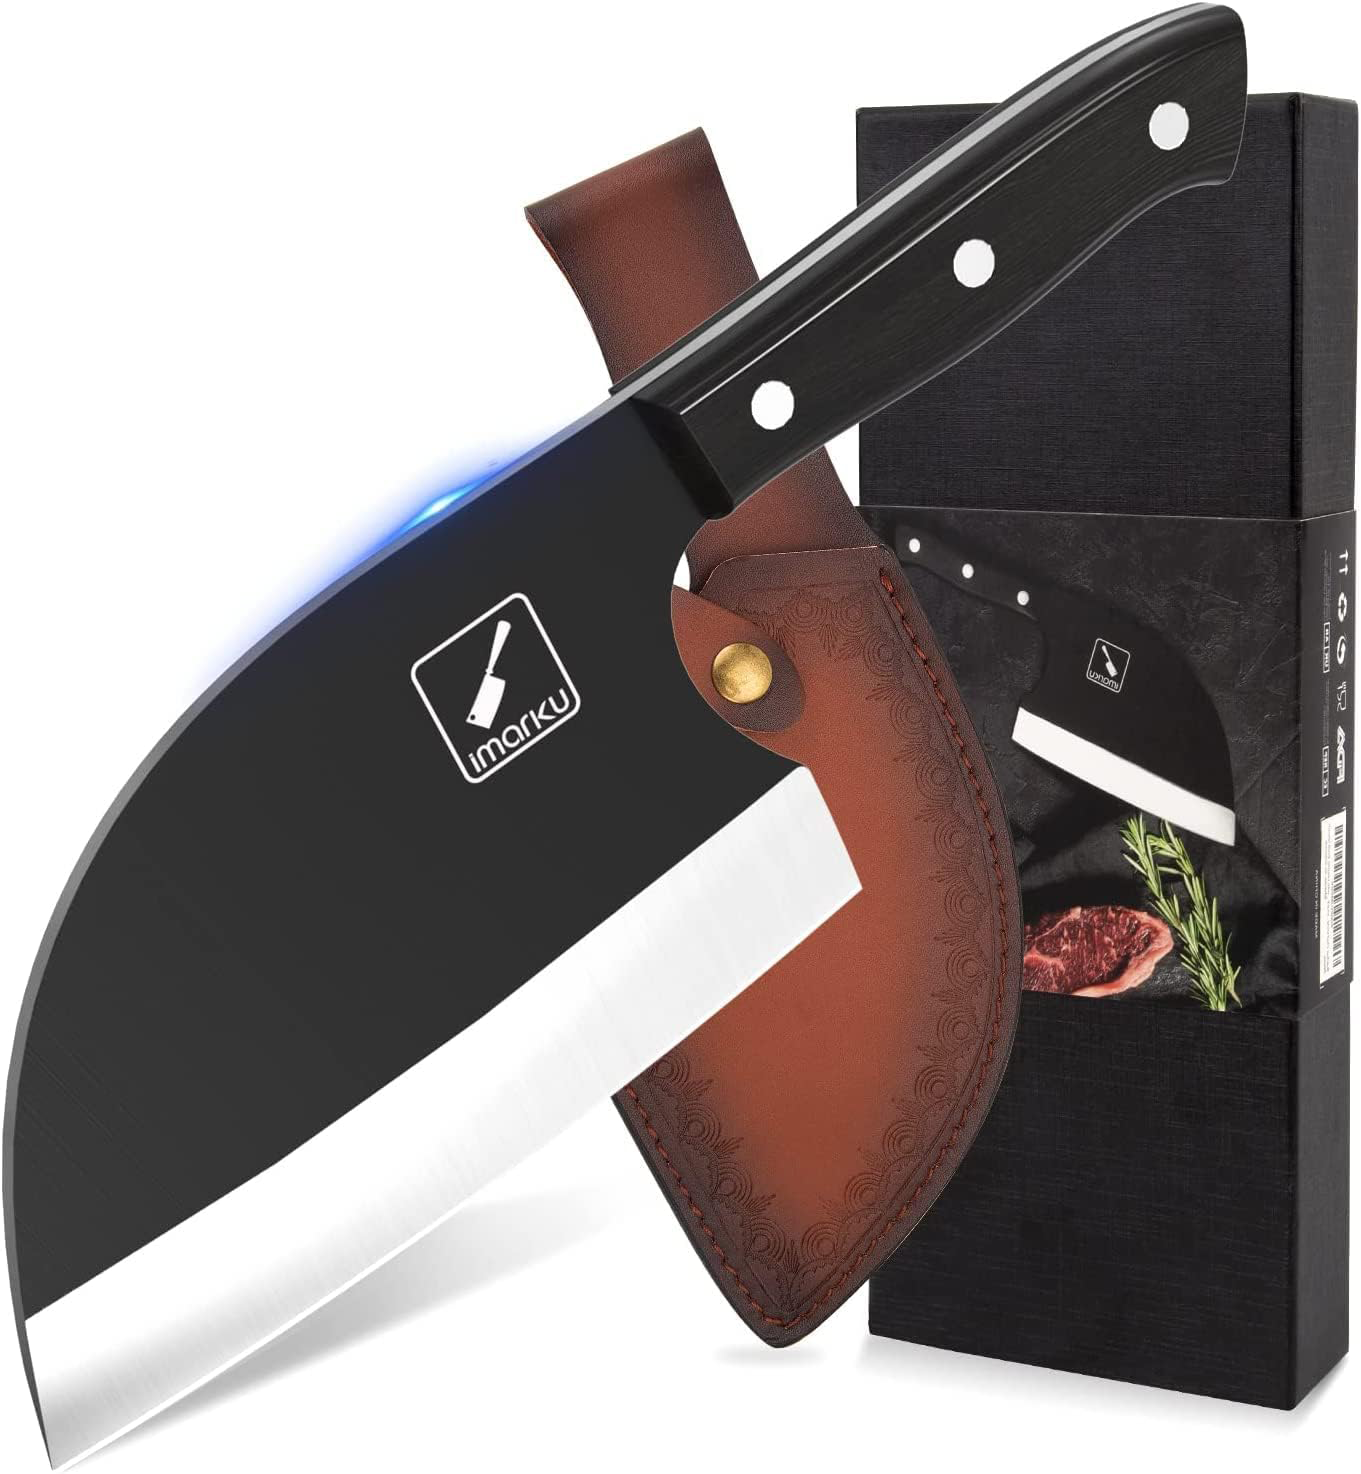 KD Serbian Cleaver Butcher Knife: Perfect for BBQ and Camping